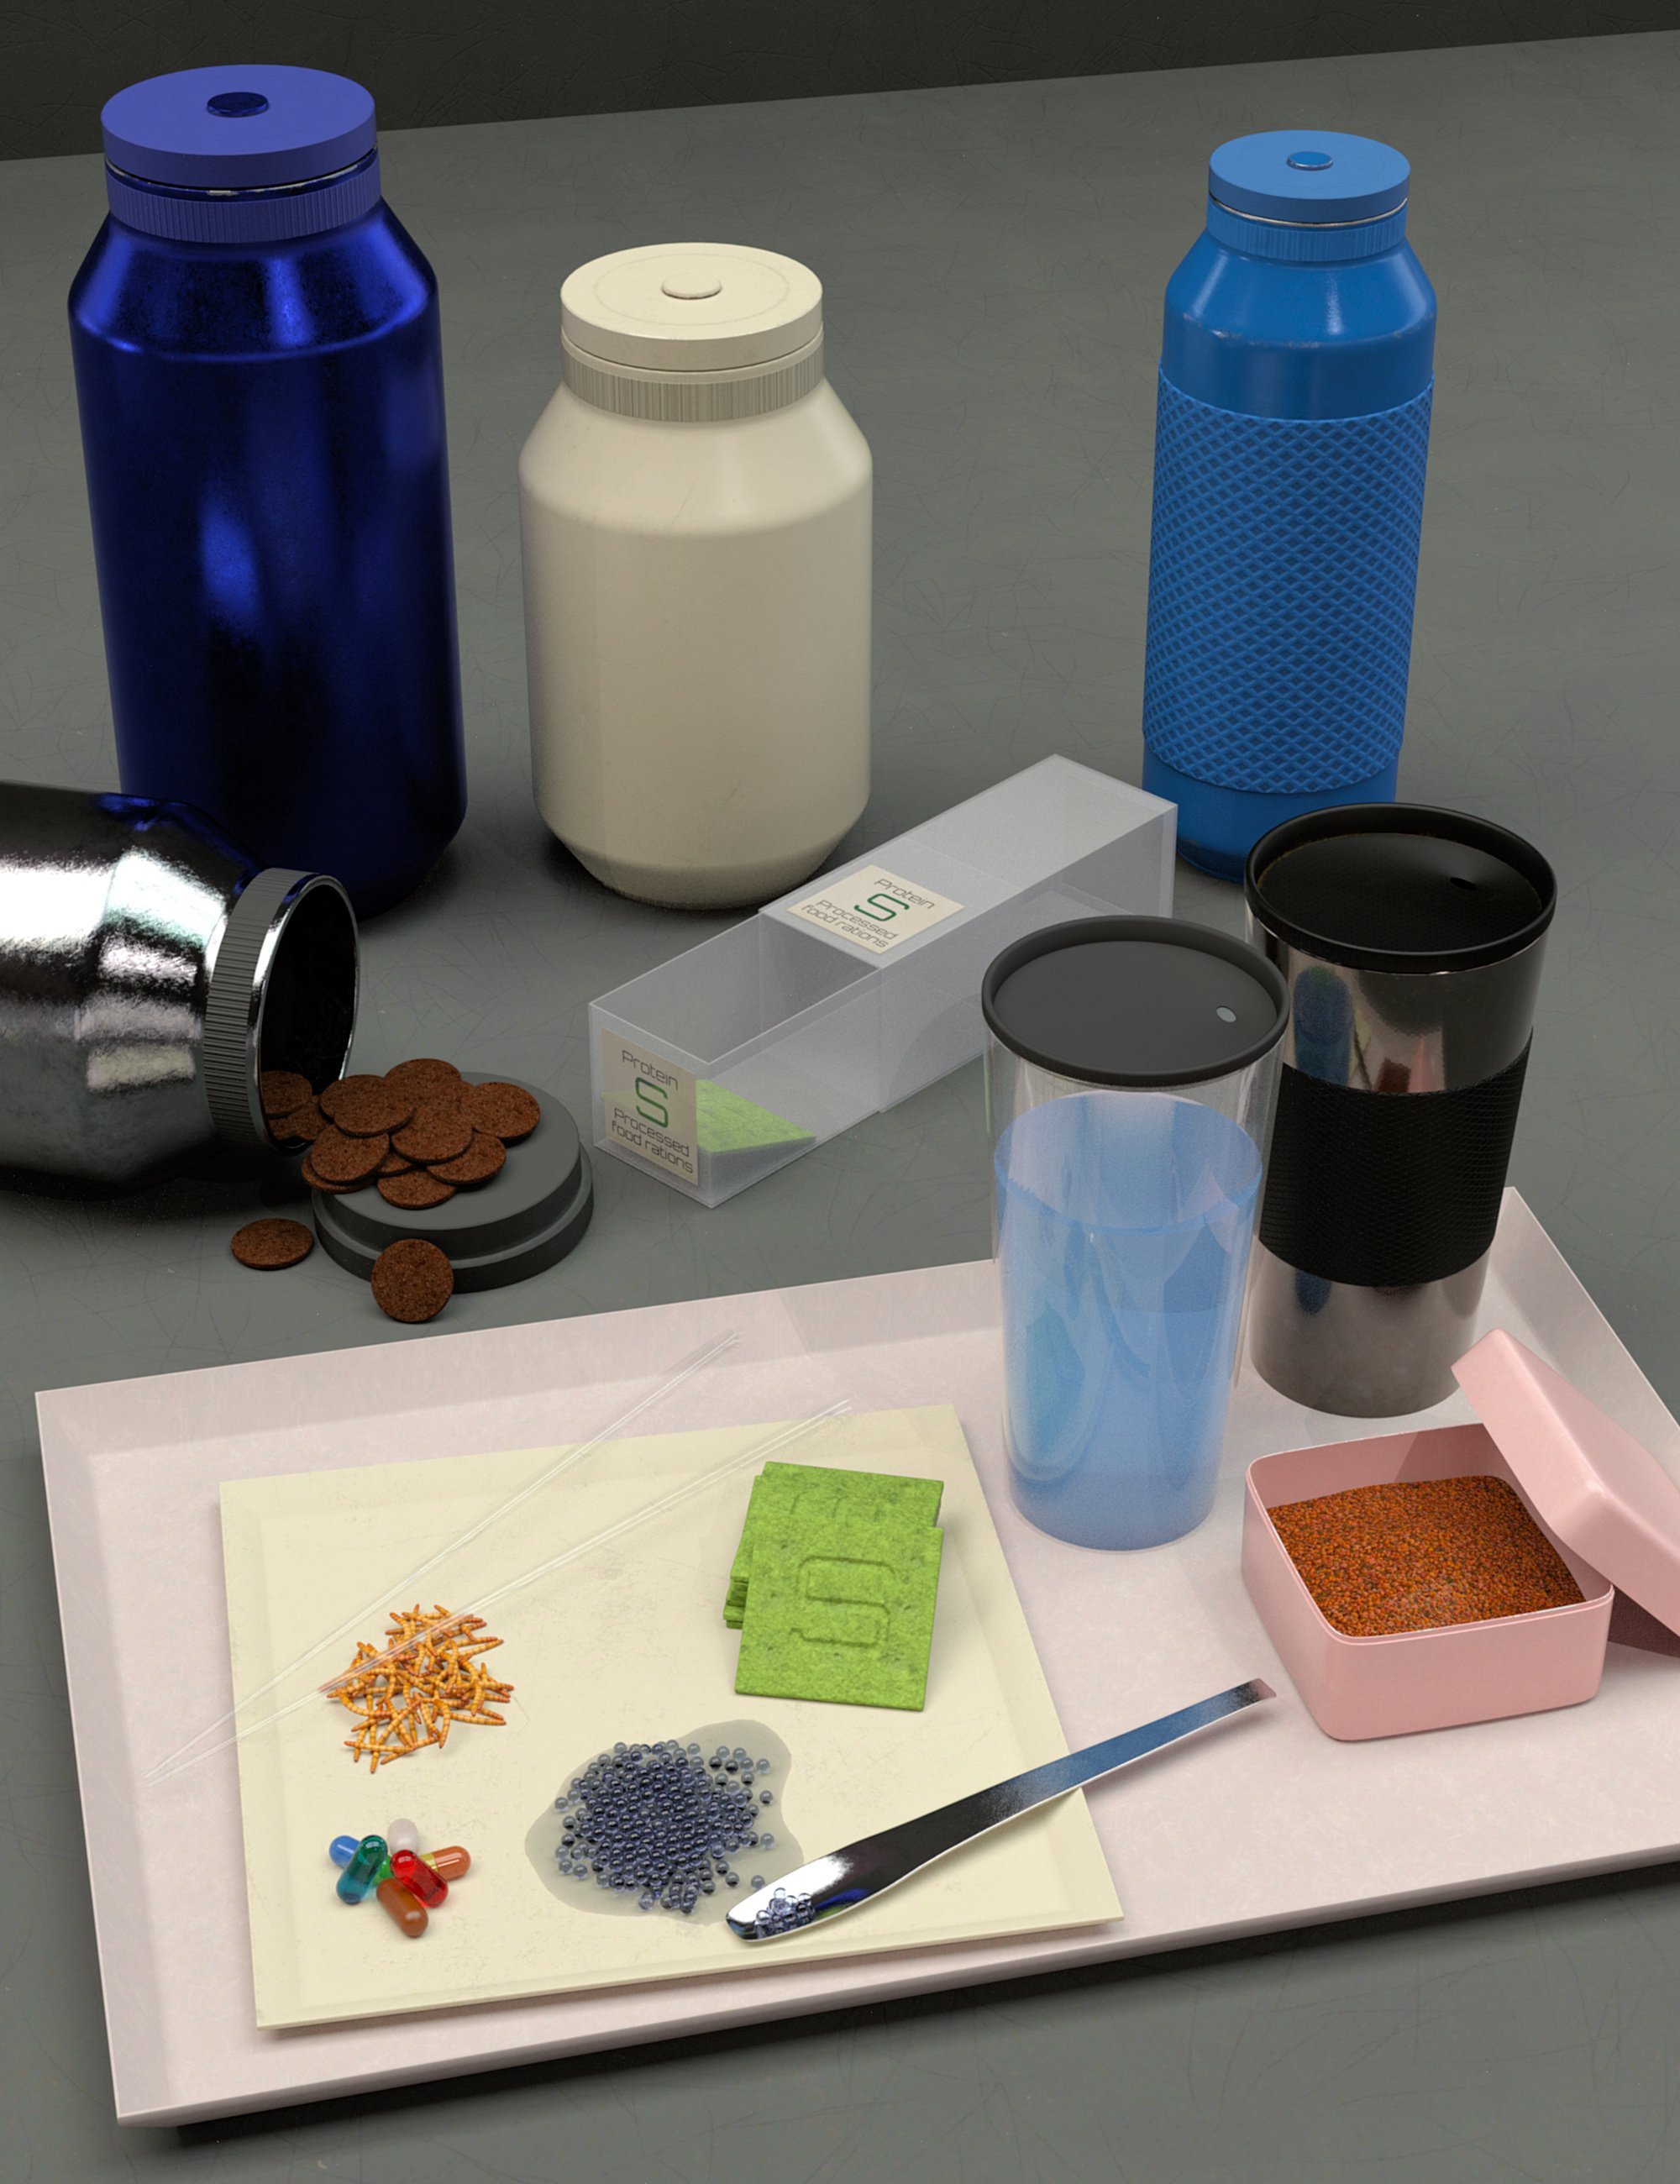 Meal Plan 2061: Foods and Dinnerware for Iray by: Khory, 3D Models by Daz 3D